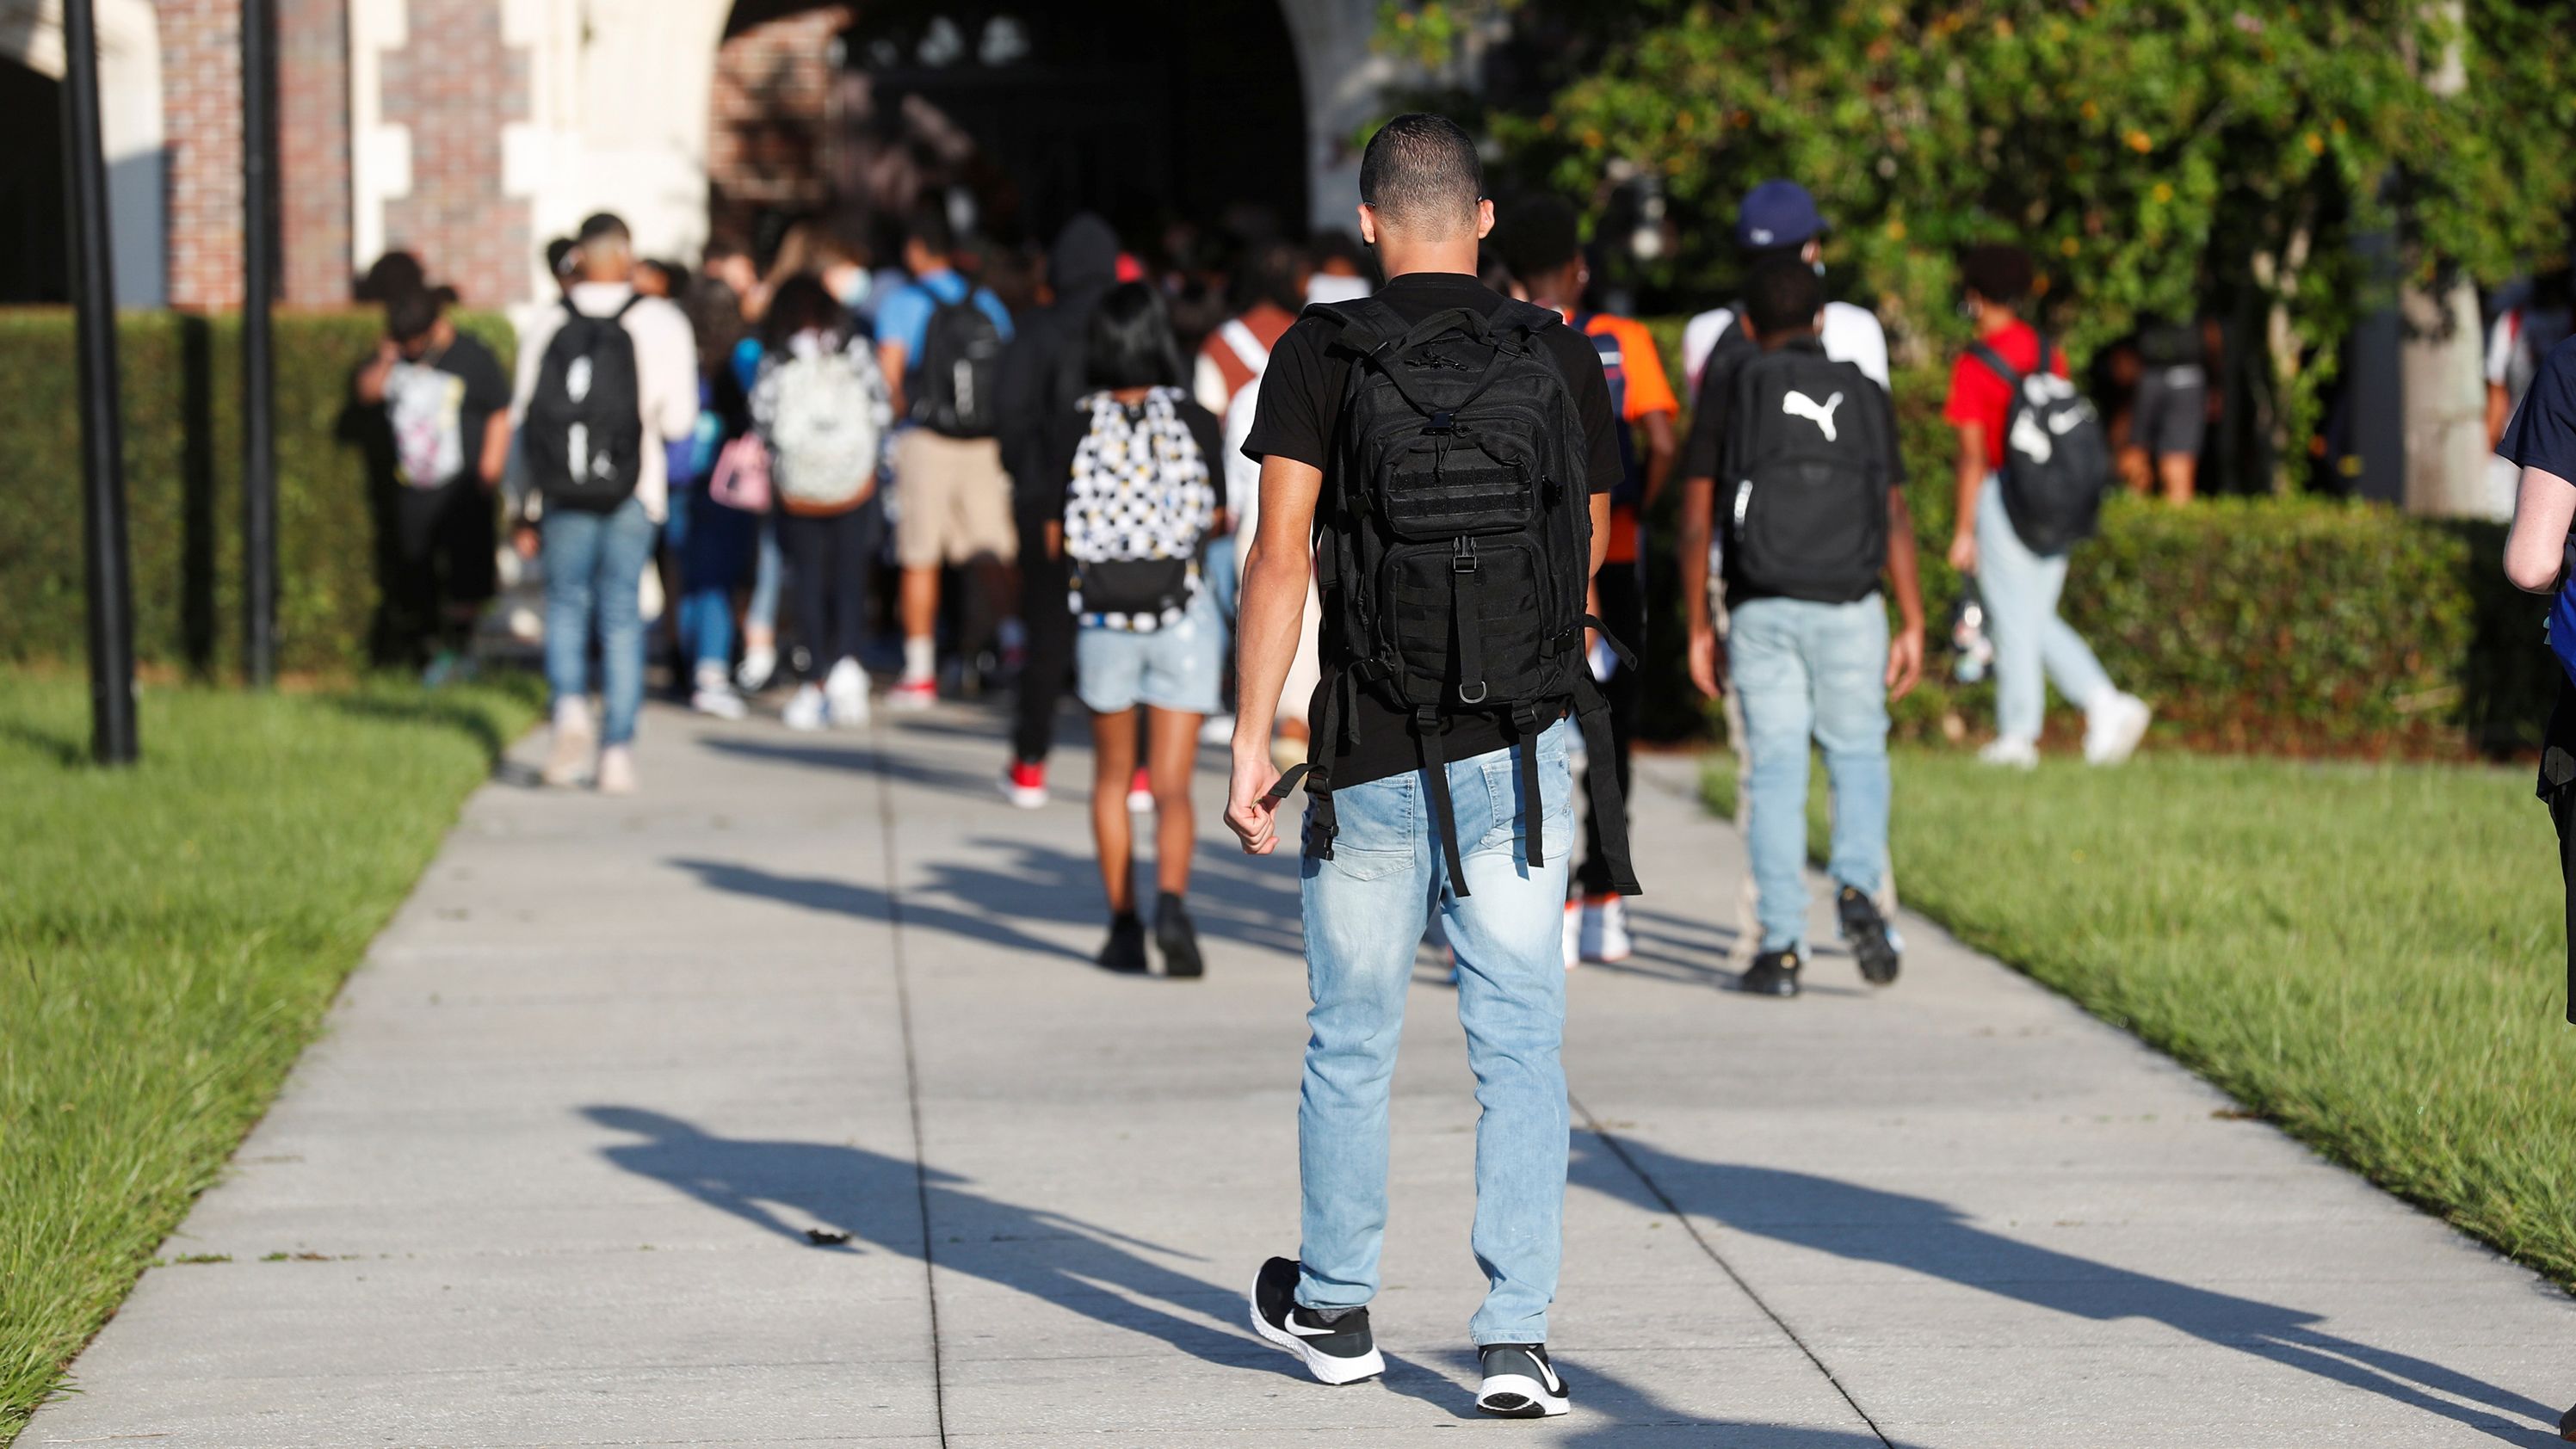 Students return on the first day of school at Hillsborough High School in Tampa, Florida, on August 10, 2021.